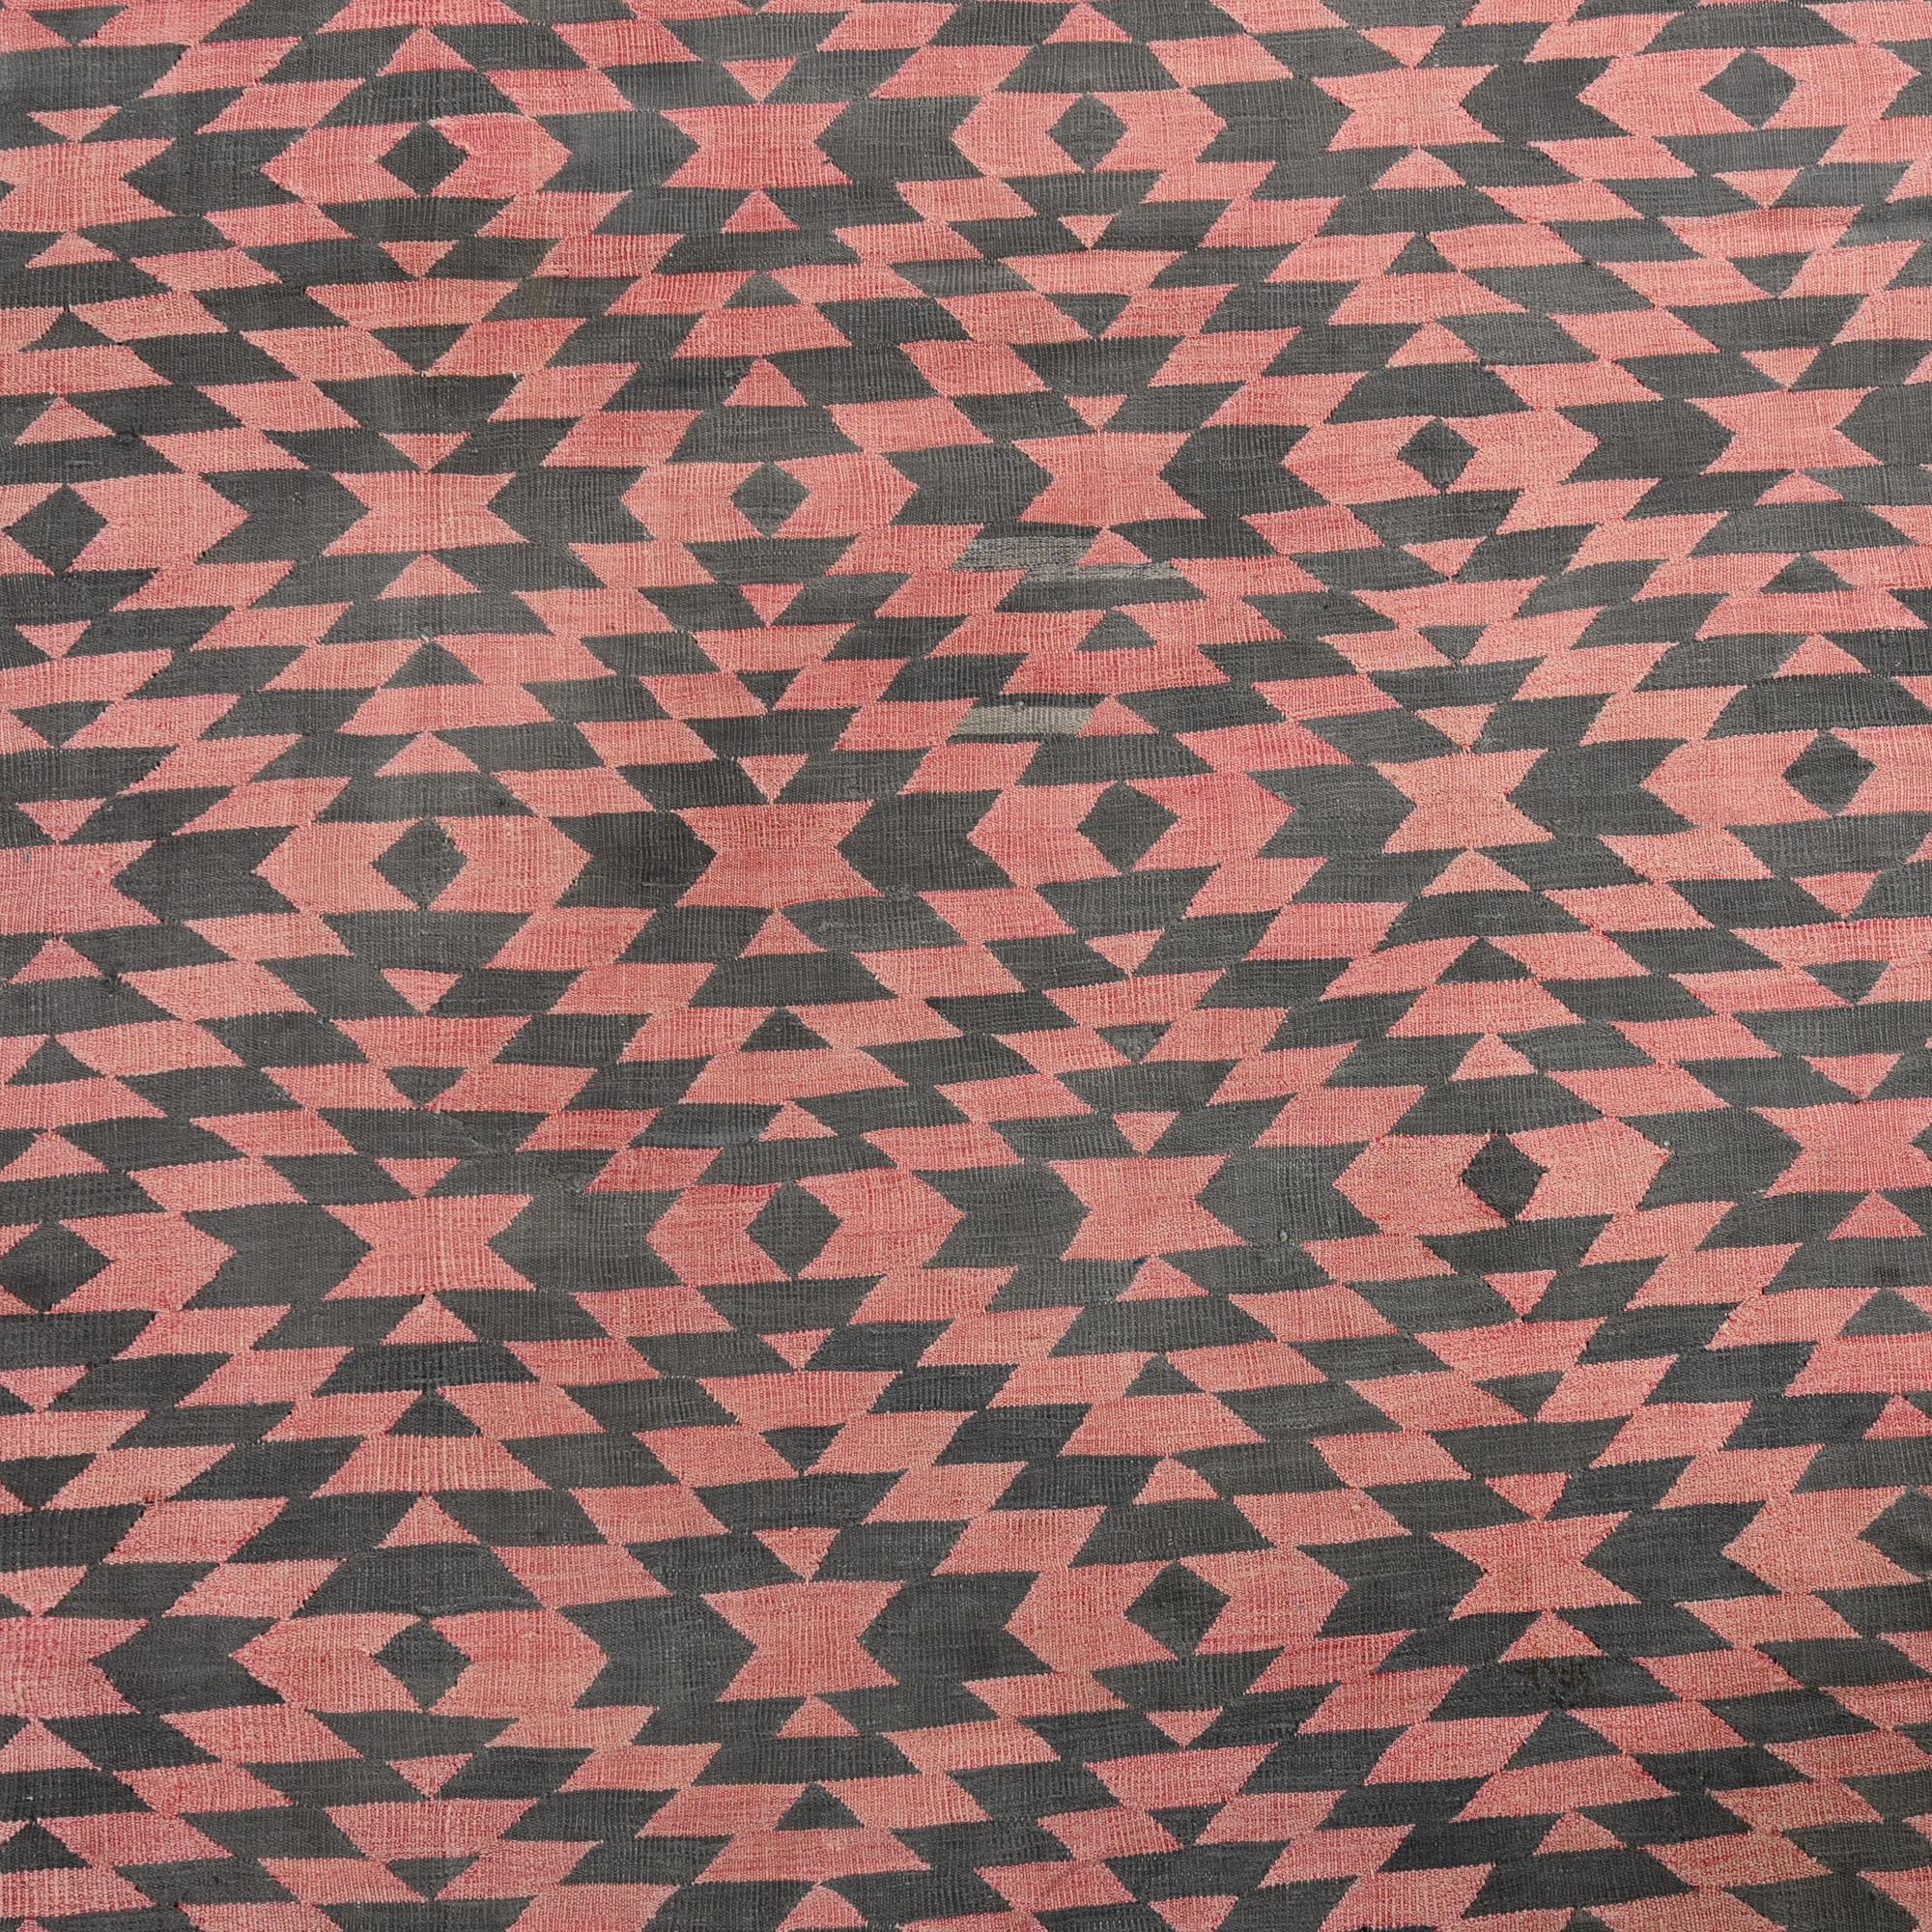 Hand-Knotted Vintage Dhurrie Flat Weave in Pink with Brown Geometric Patterns by Rug & Kilim For Sale